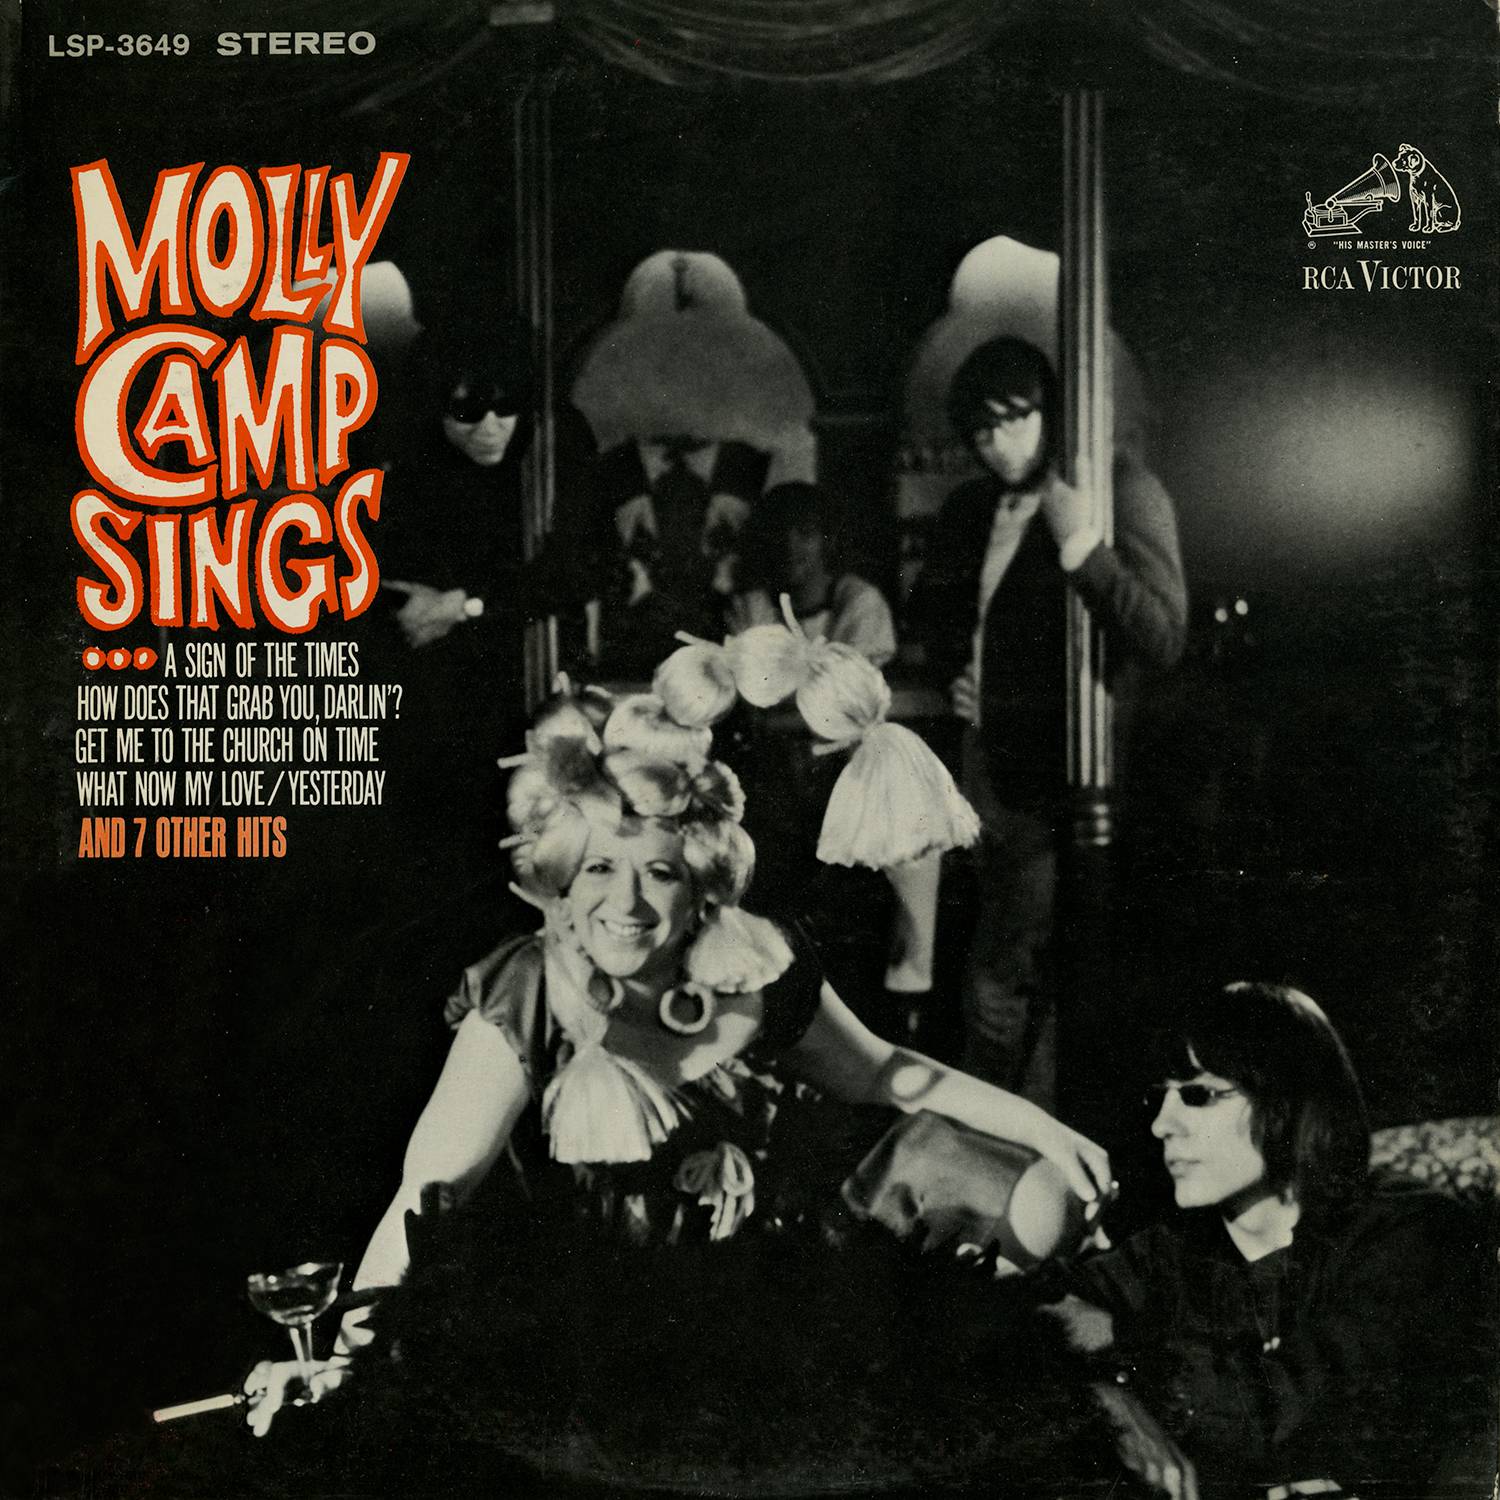 Molly Camp - Molly Camp Sings (1966/2016) [AcousticSound FLAC 24bit/192kHz]